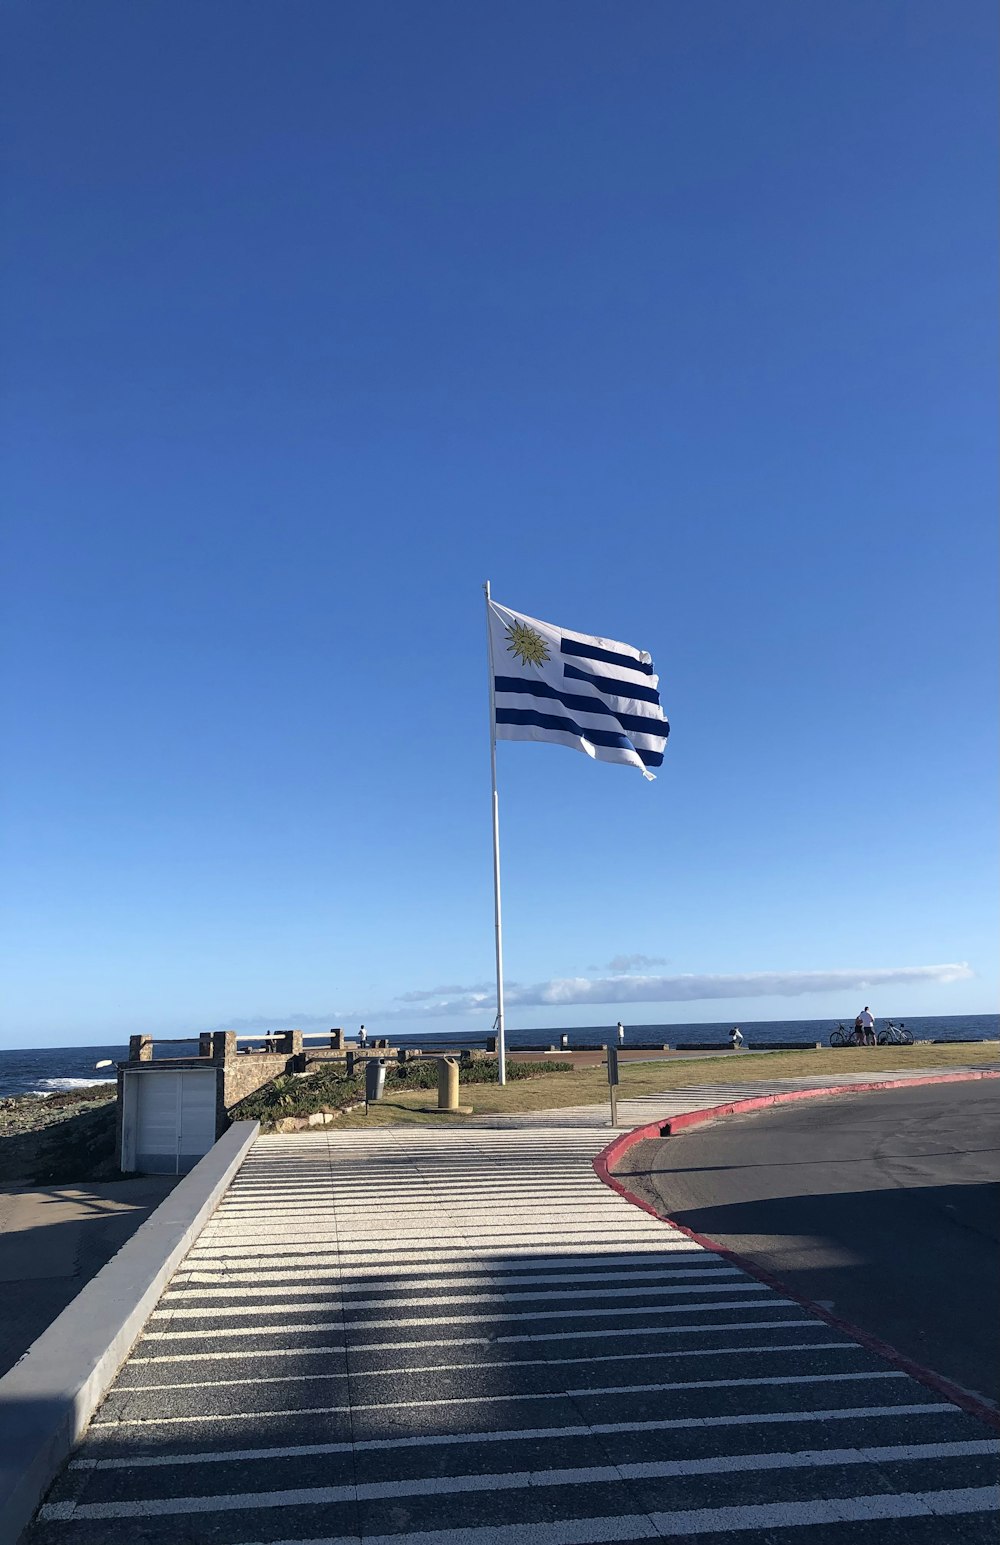 a flag is flying in the wind on a sunny day